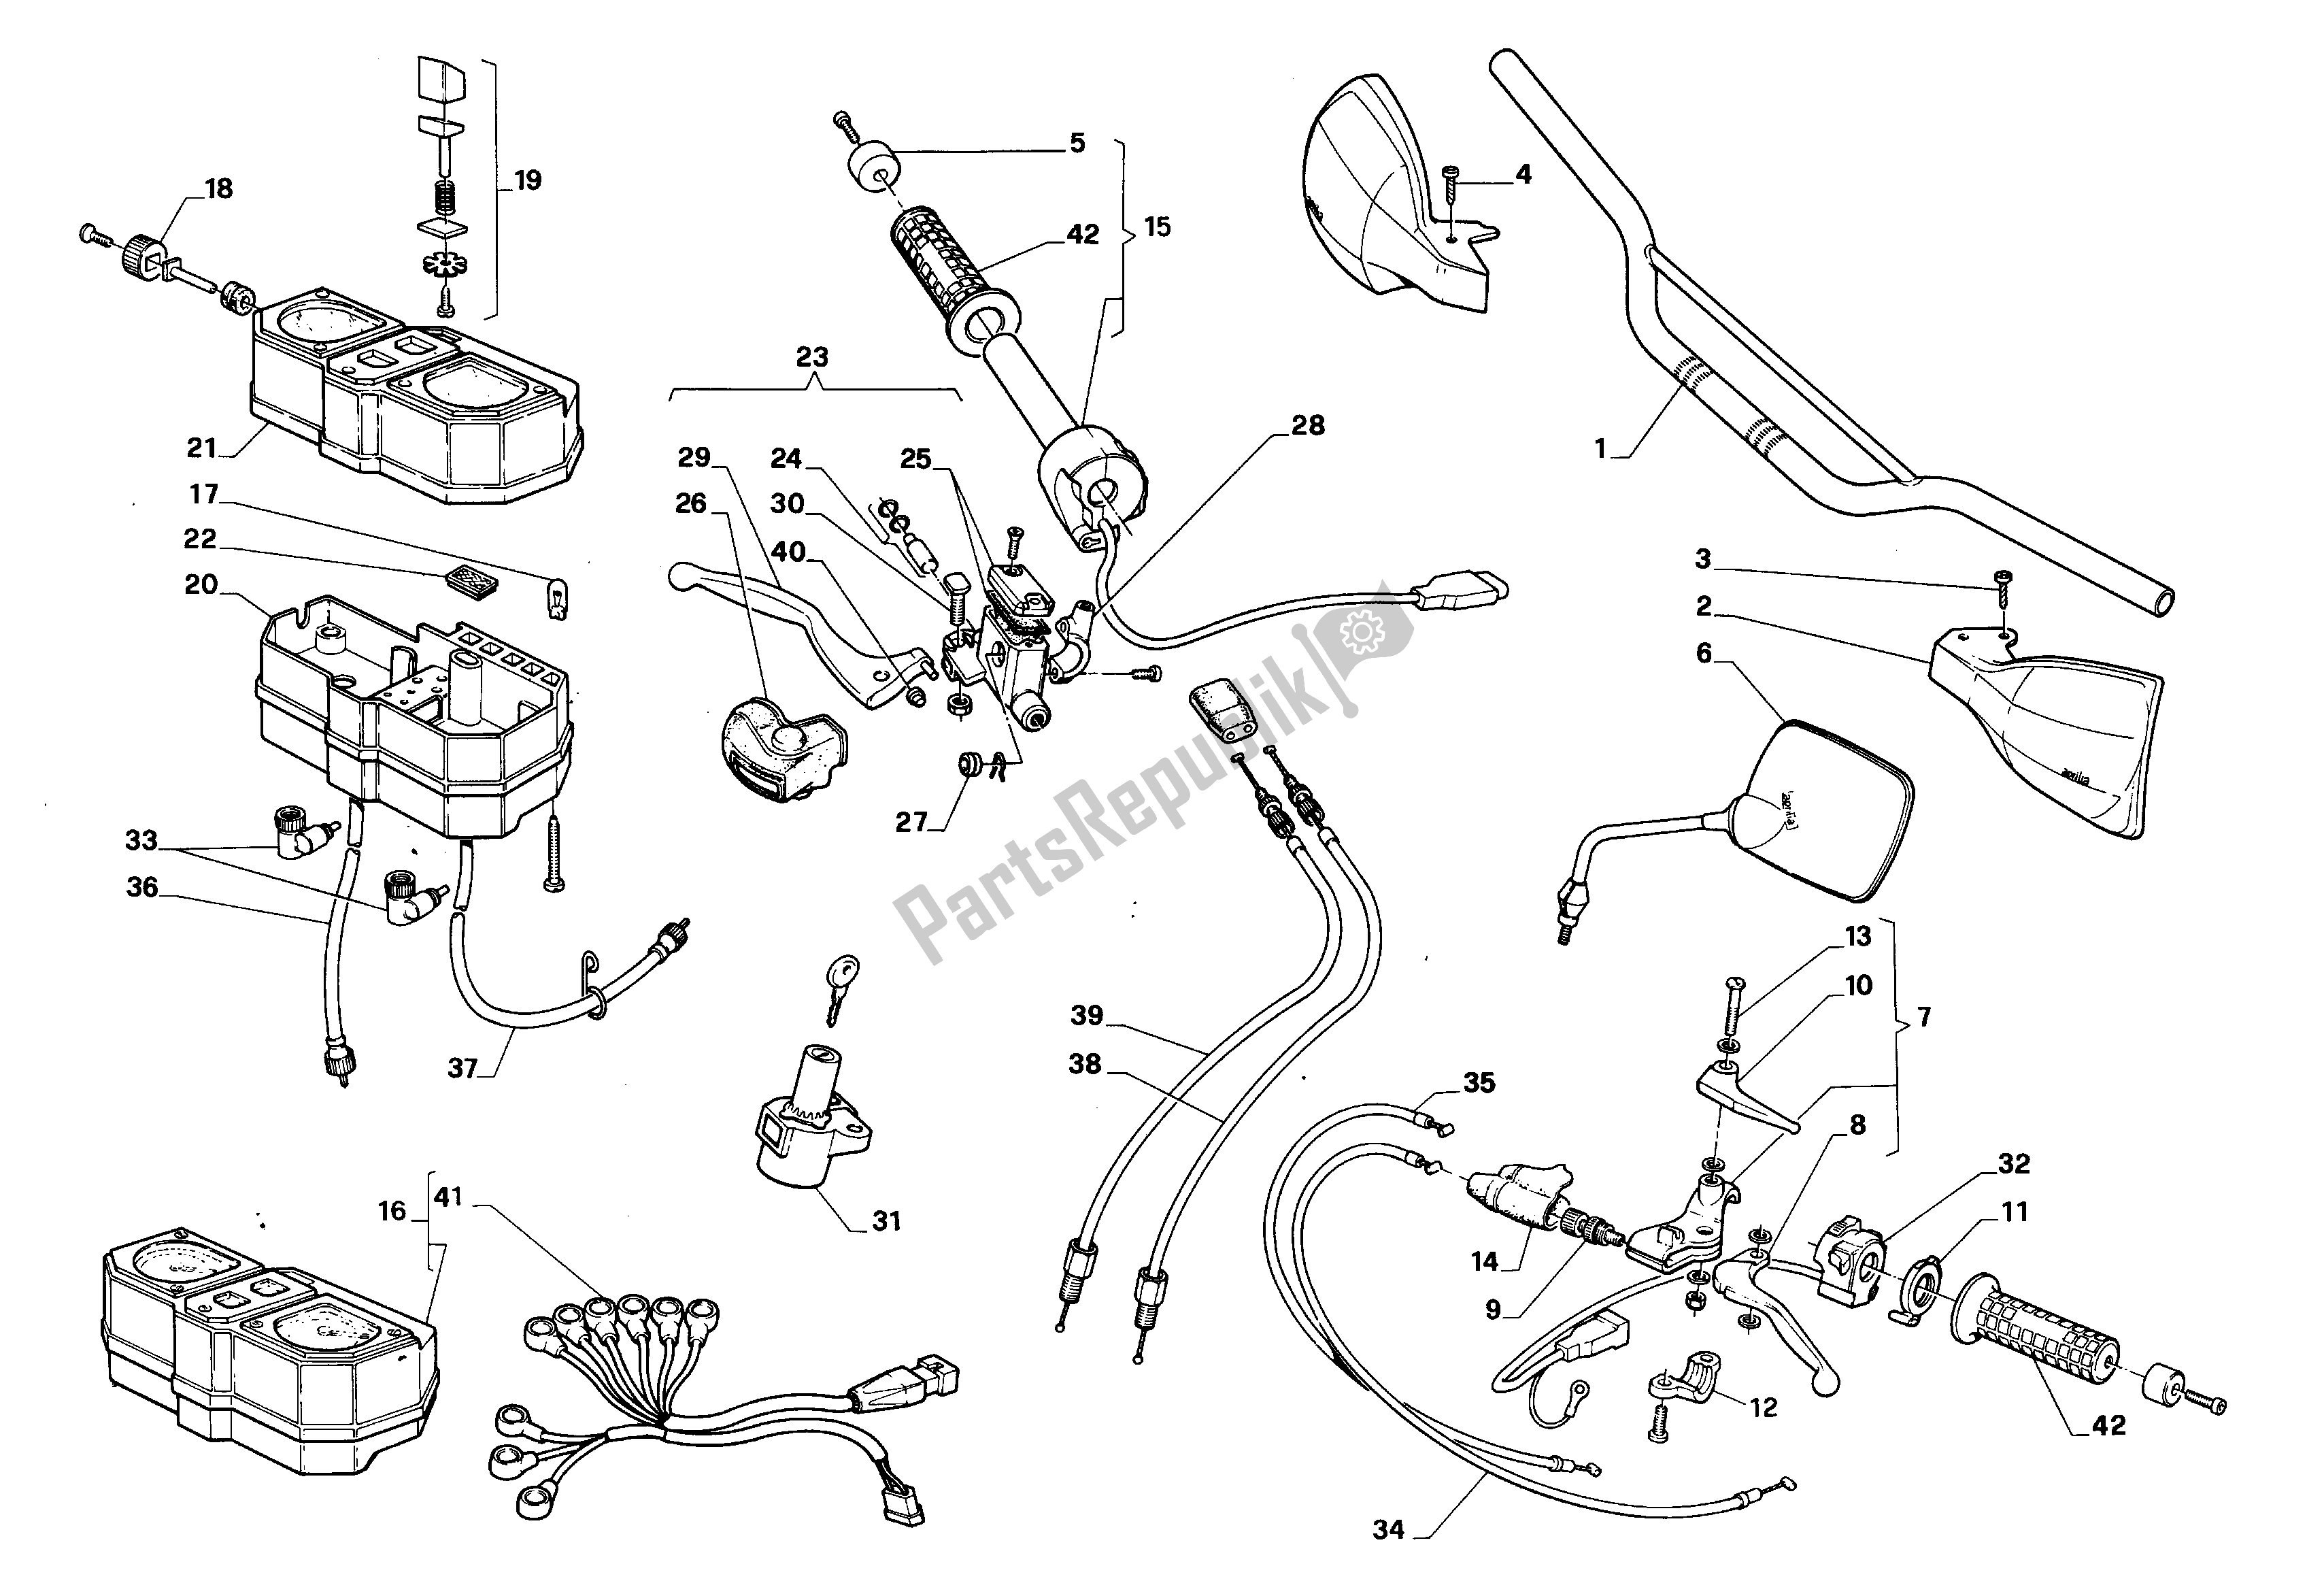 All parts for the Handle Bars And Commands of the Aprilia Tuareg 600 1989 - 1990